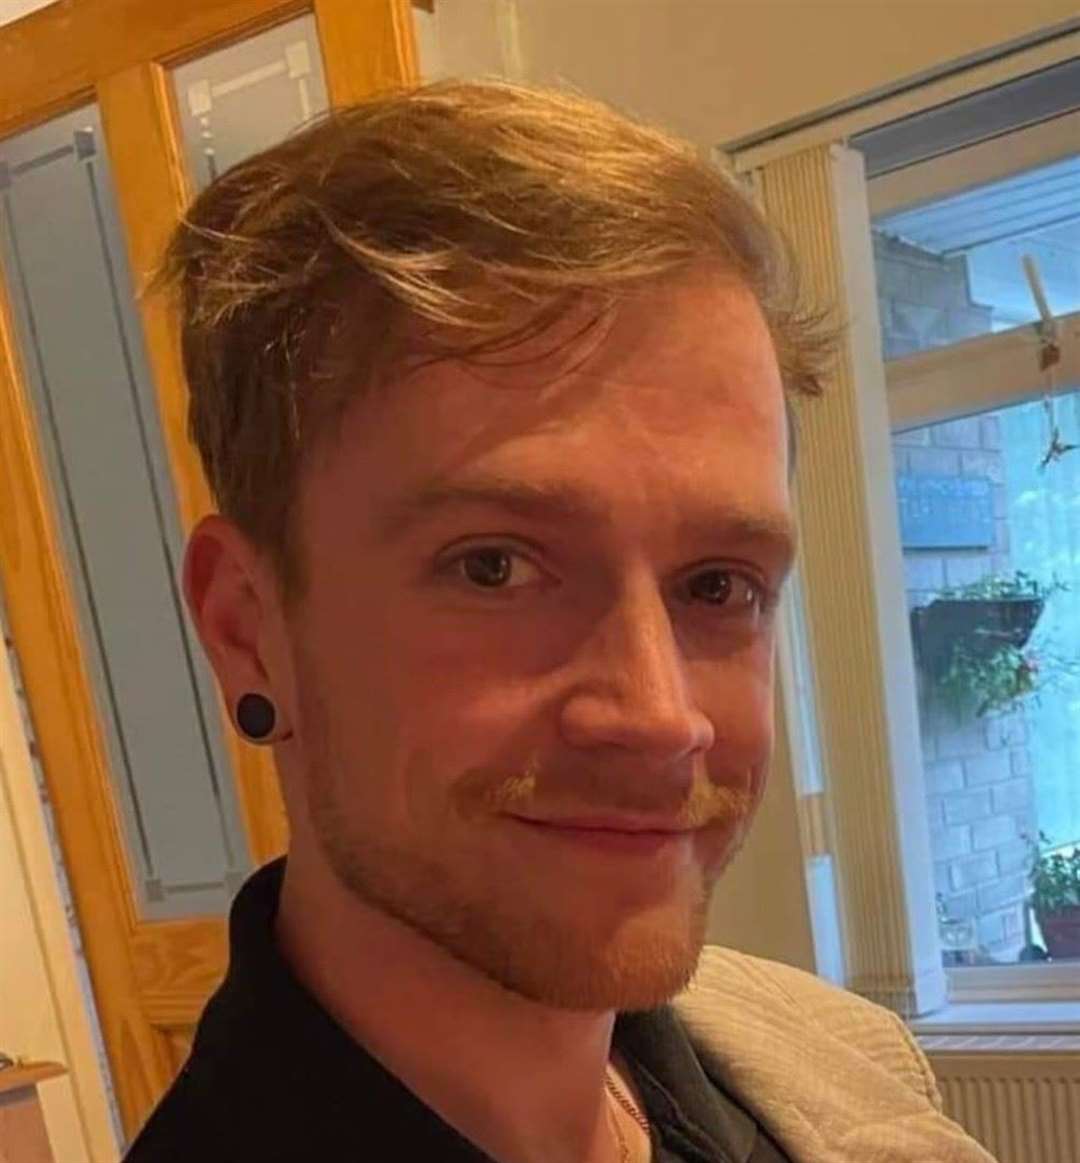 Robert was last seen on Saturday near Blue Inc in Vancouver Quarter